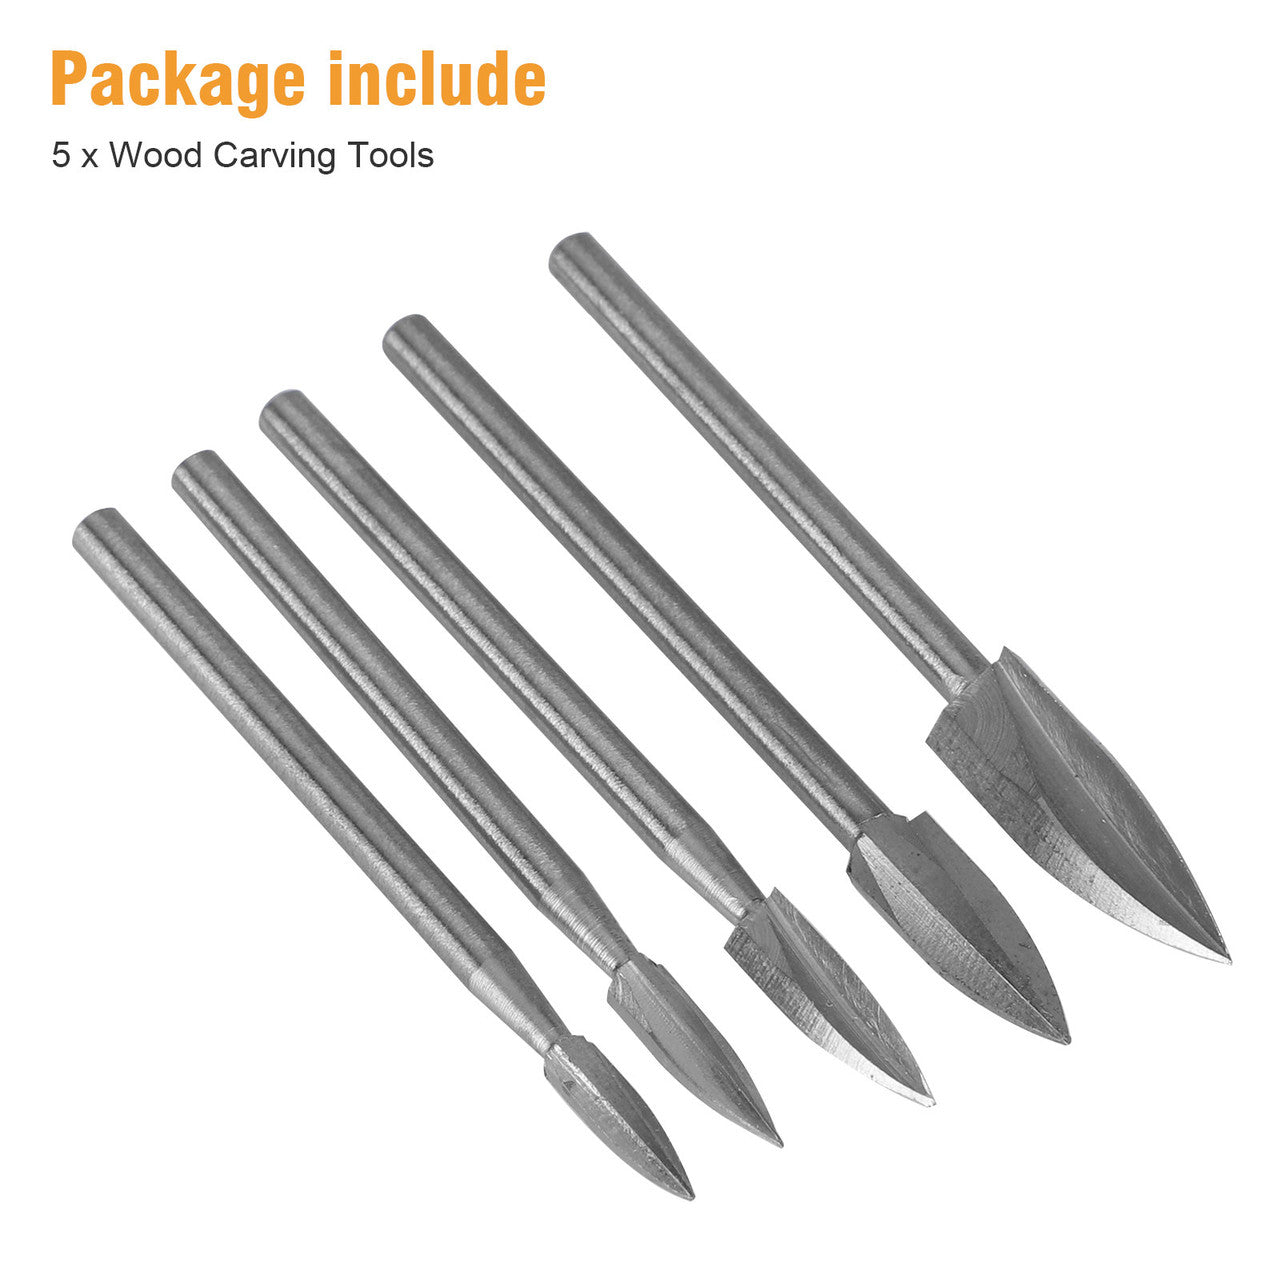 Set Milling Engraving Wood Carving Drill Bit Set for Dremel Rotary Tools